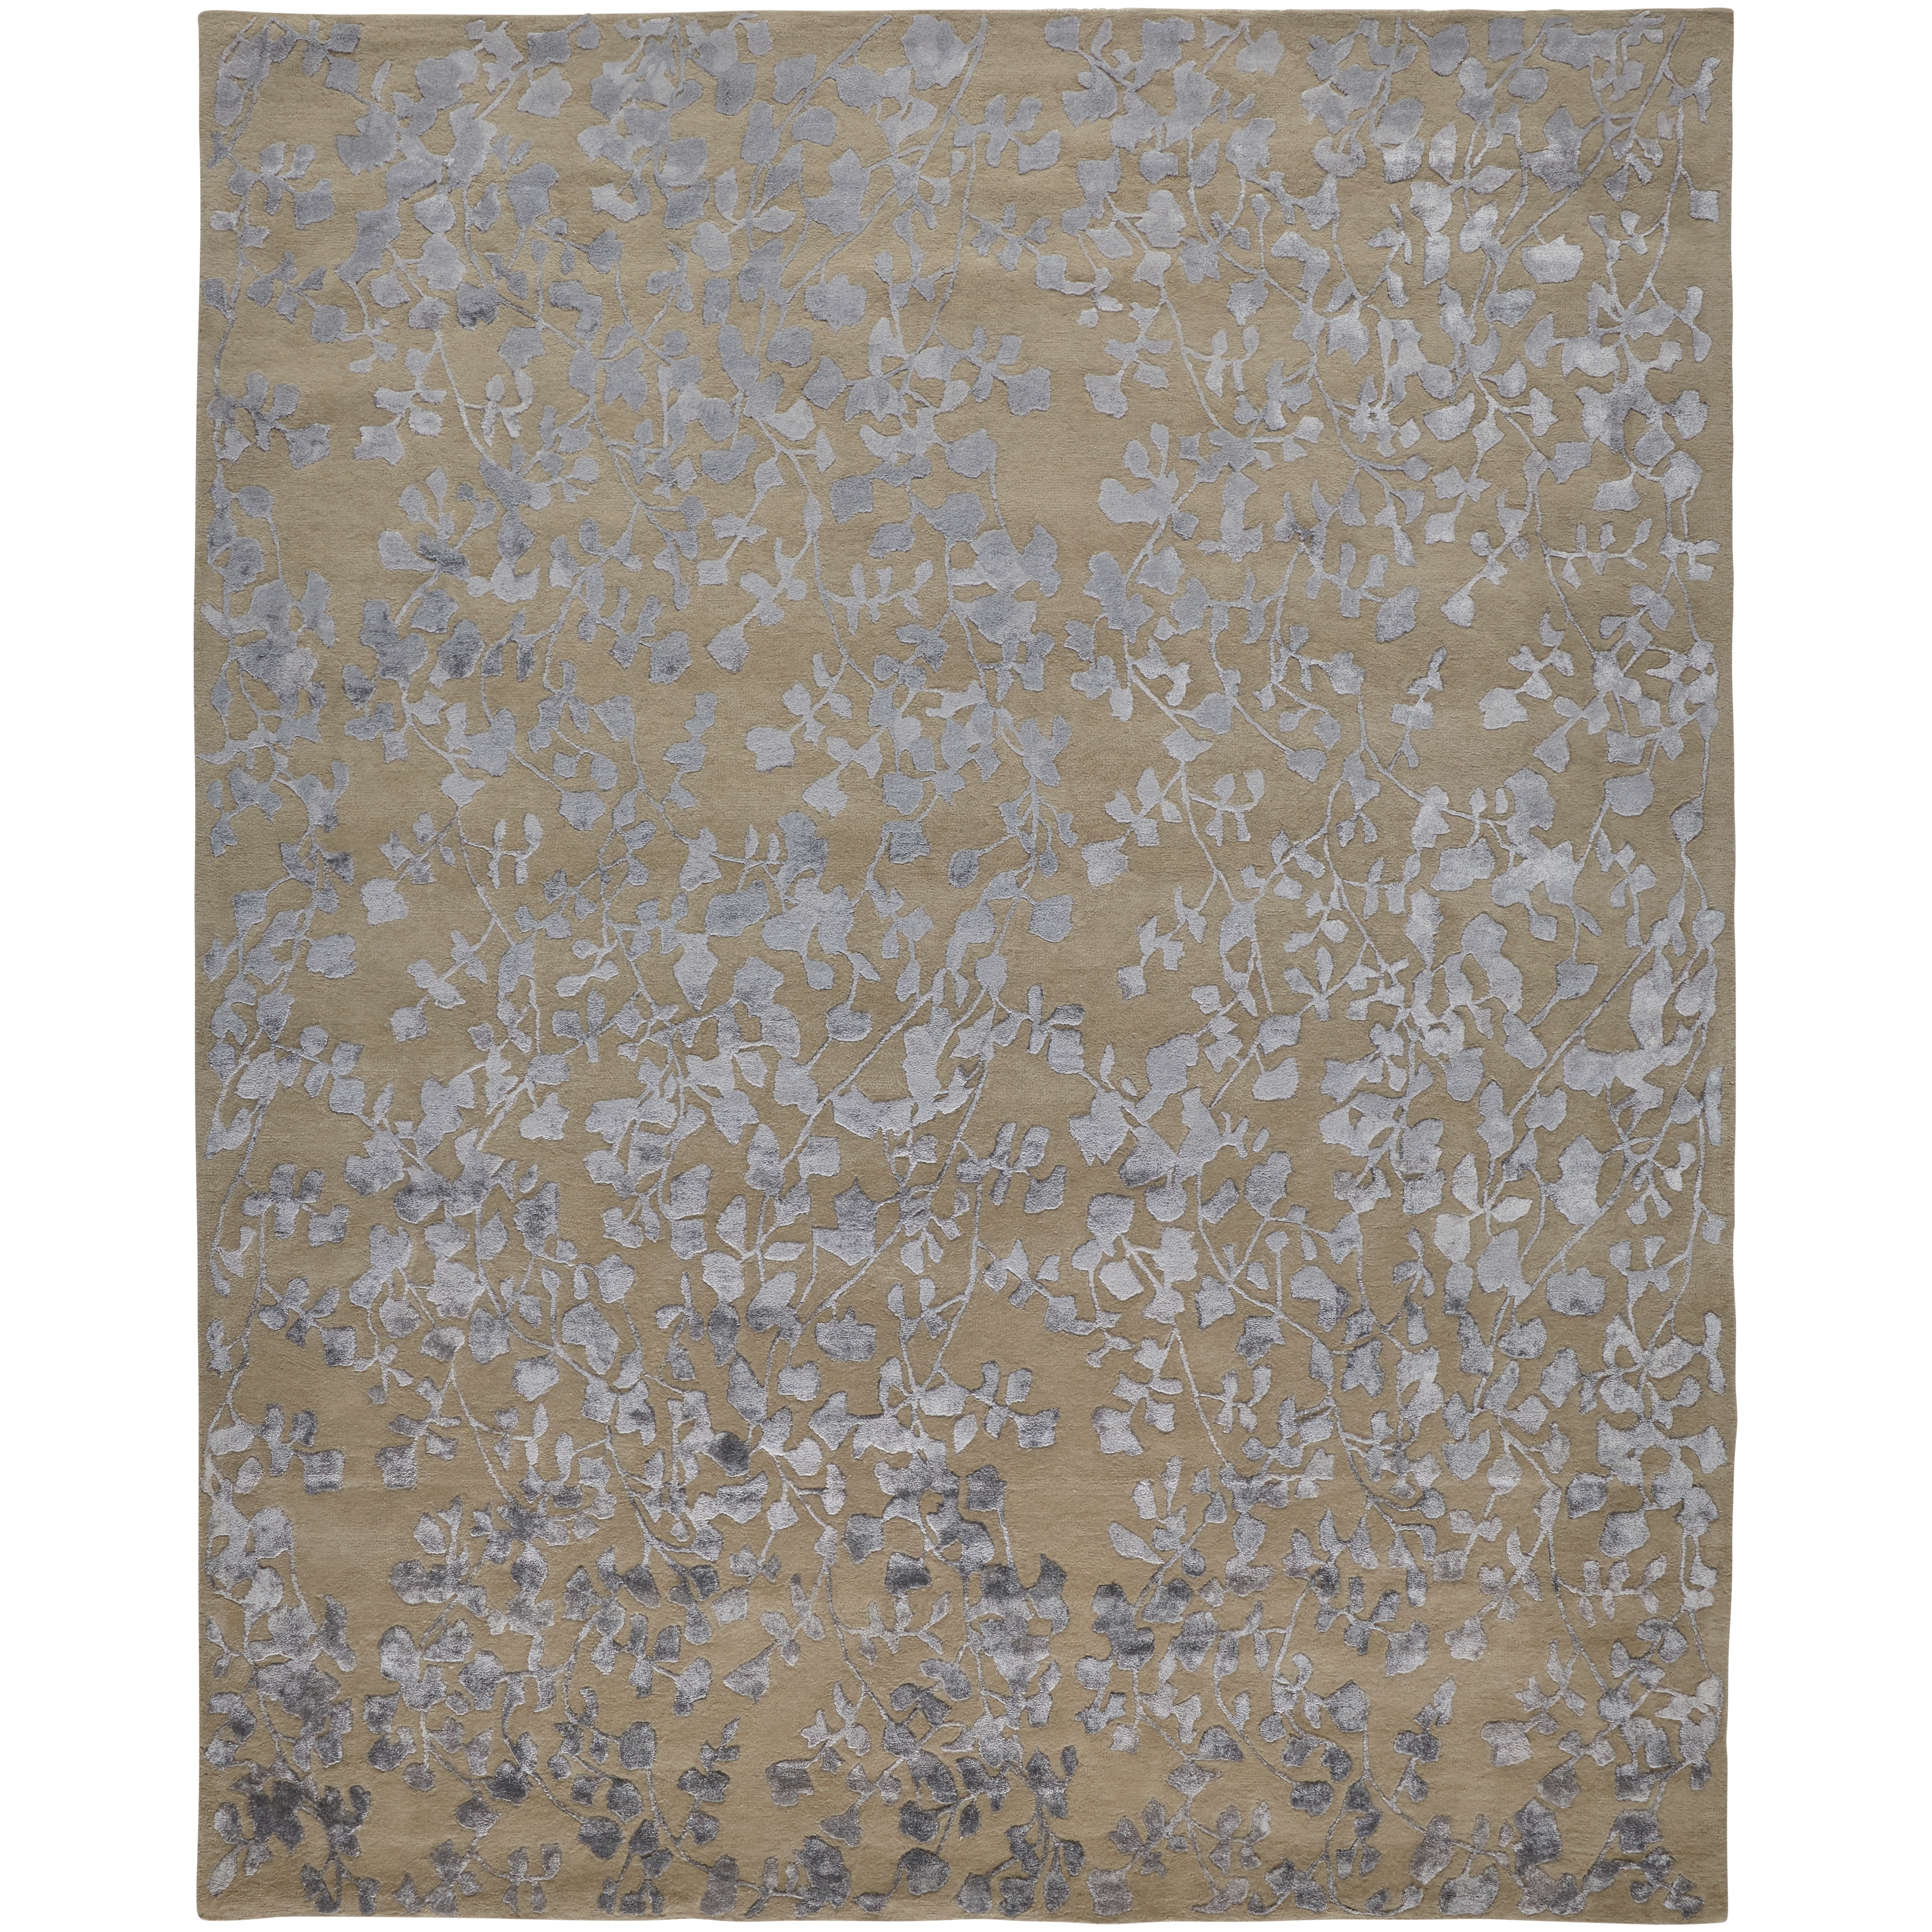 Khalo High/Low Floral Wool Rug, Latte/SIlver Gray, 8ft x 10ft Area Rug - 8' x 10'/Surplus